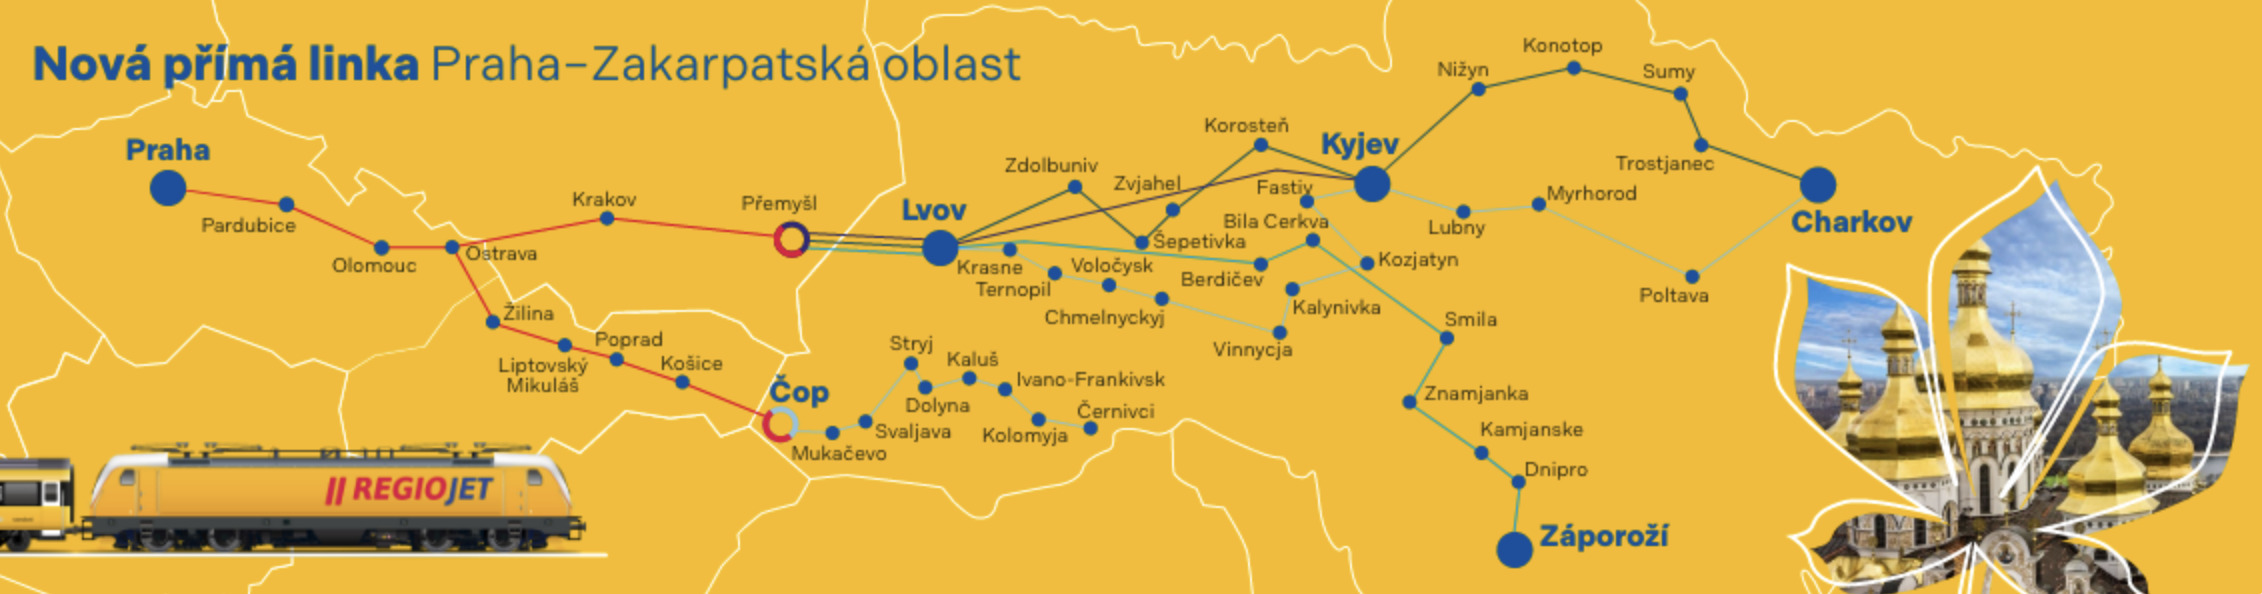 Starting from March 27th, RegioJet has added a second line to Ukraine, connecting through Slovakia to the Zakarpattia Oblast. Passengers now have the option to choose between two lines. (Photo: RejioJet)